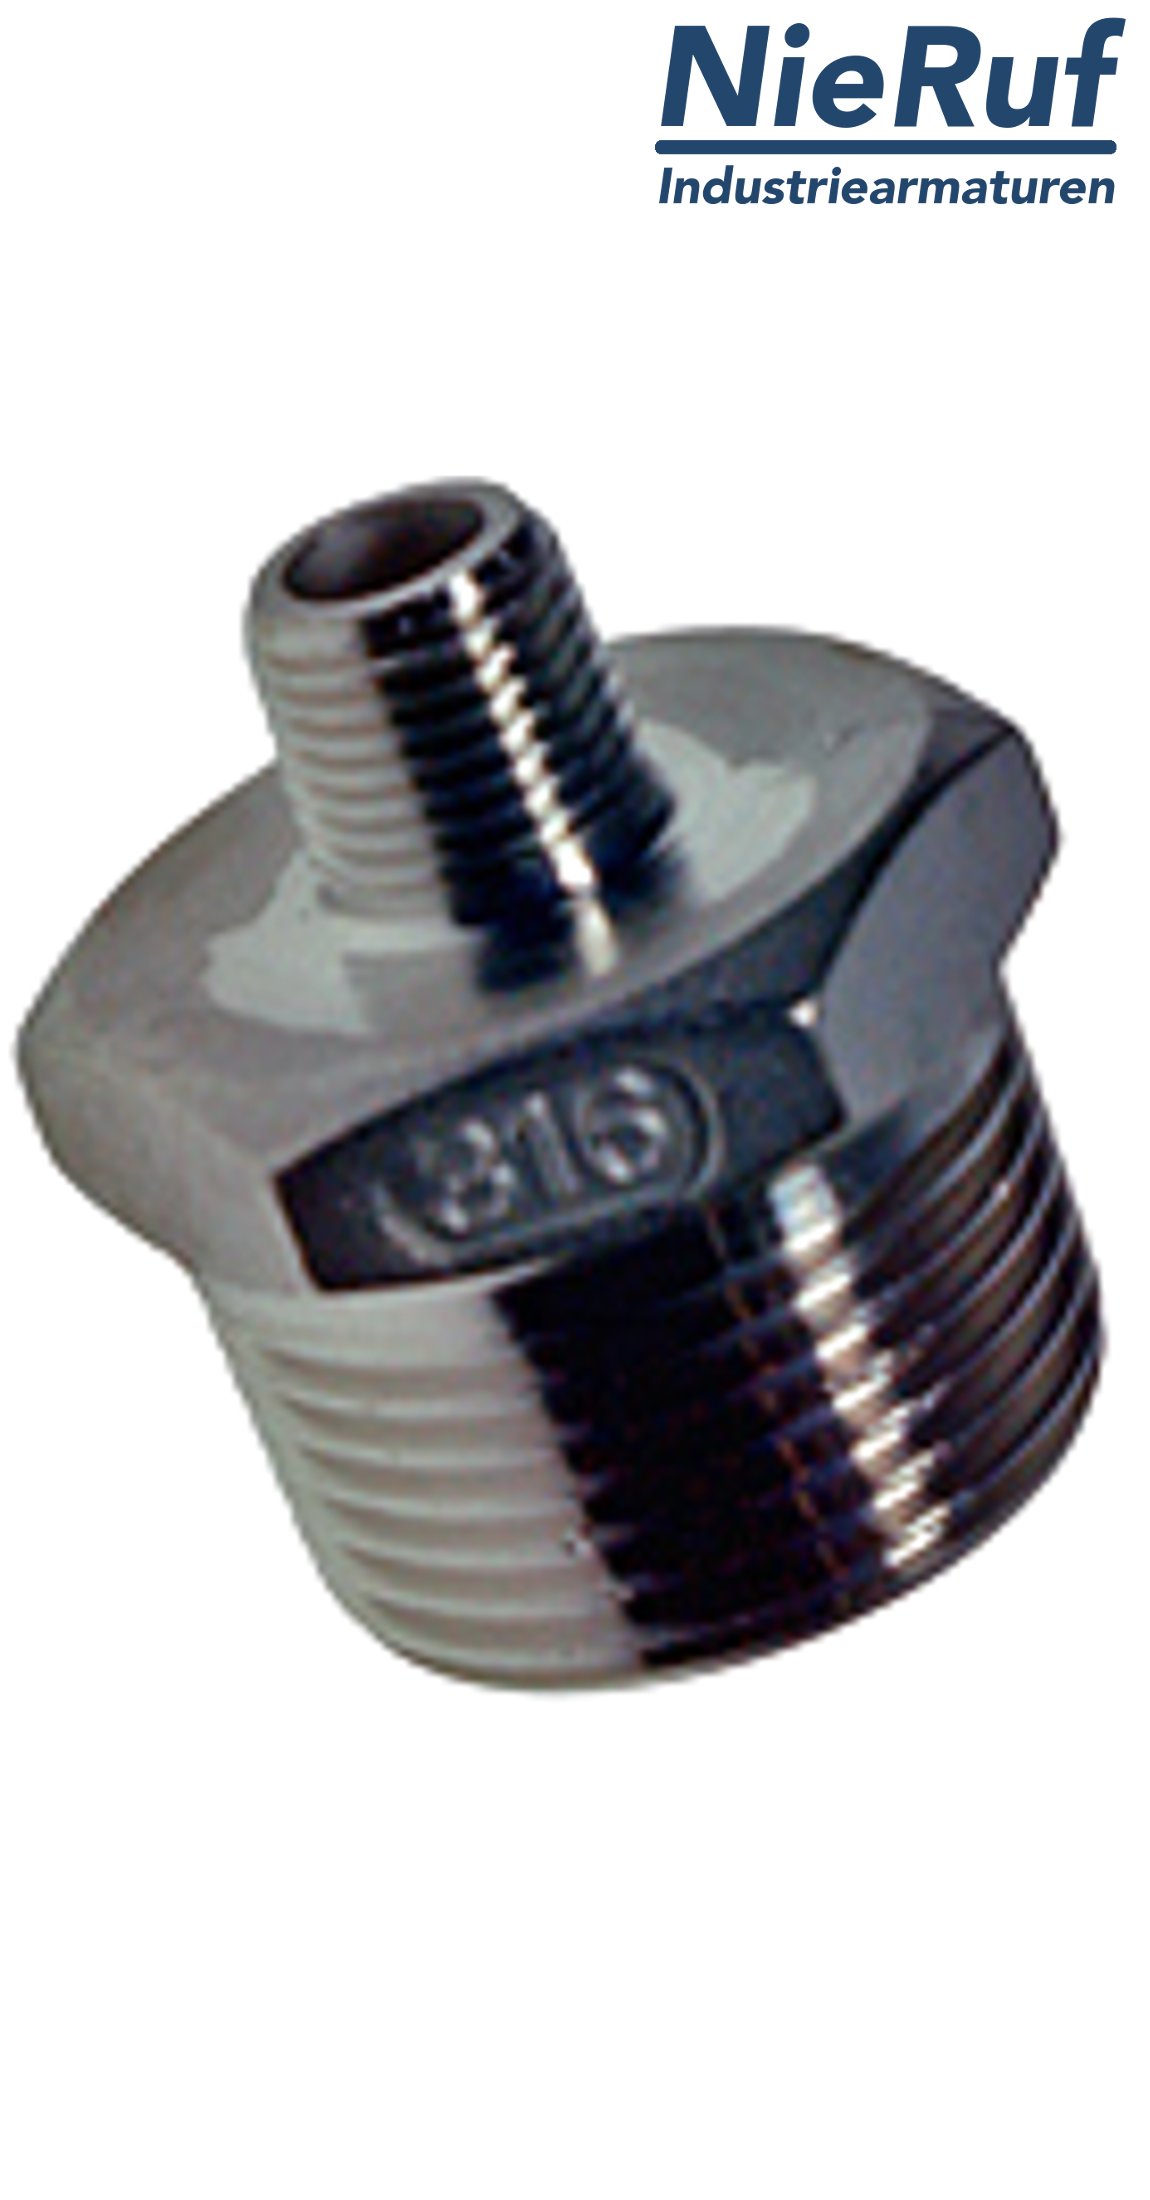 reducing nipple 3/8" x 1/8" inch NPT male stainless steel 316L